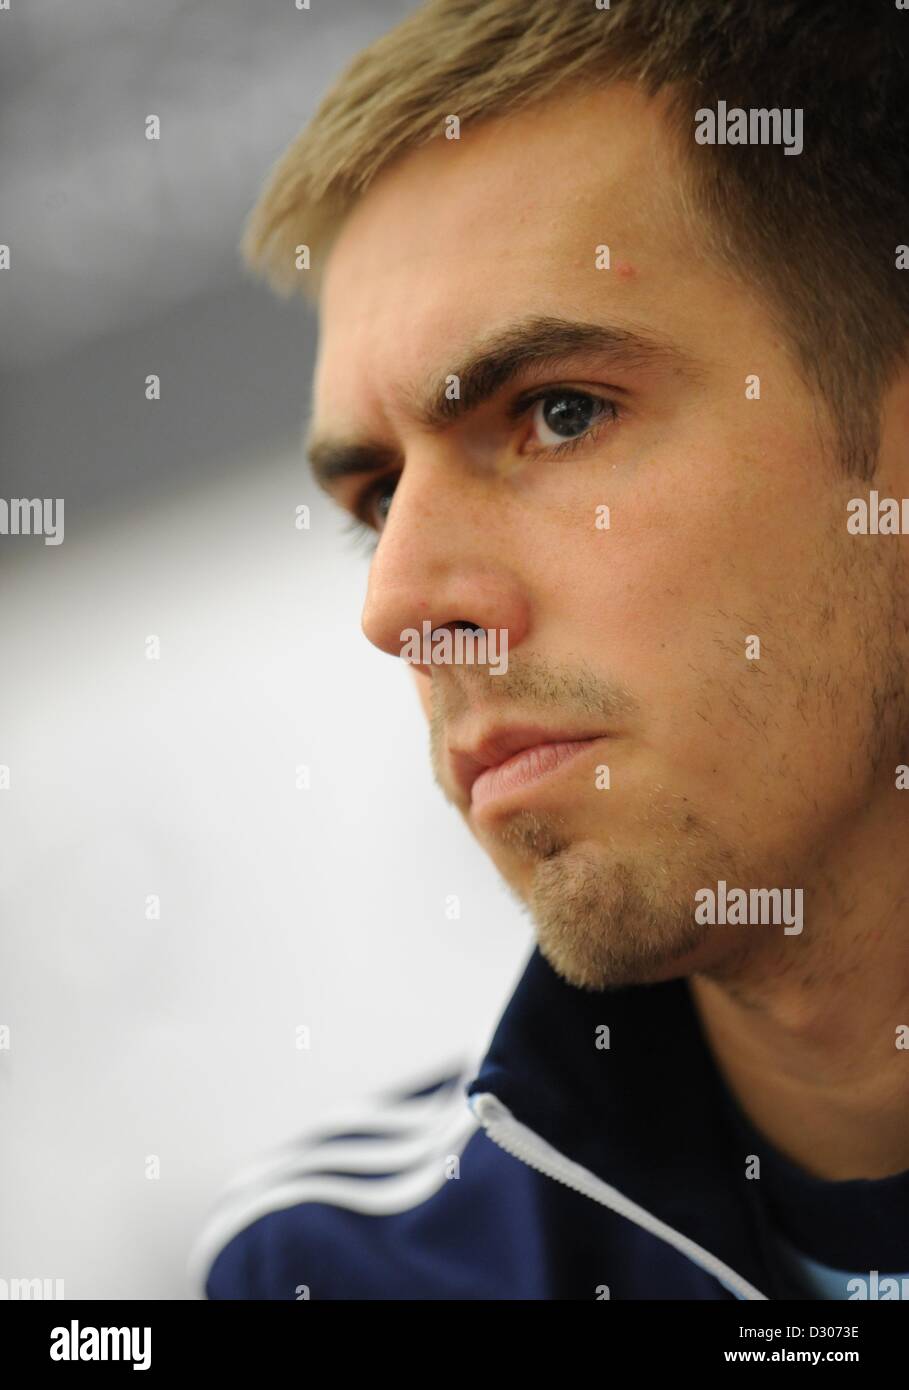 Paris, France. 5th February 2013. Germany's captain Philipp Lahm takes part in a press conference held by the German national soccer team in Paris, France, 05 February 2013. German will play France on 06 February 2013. Photo: ANDREAS GEBERT/dpa/Alamy Live News Stock Photo